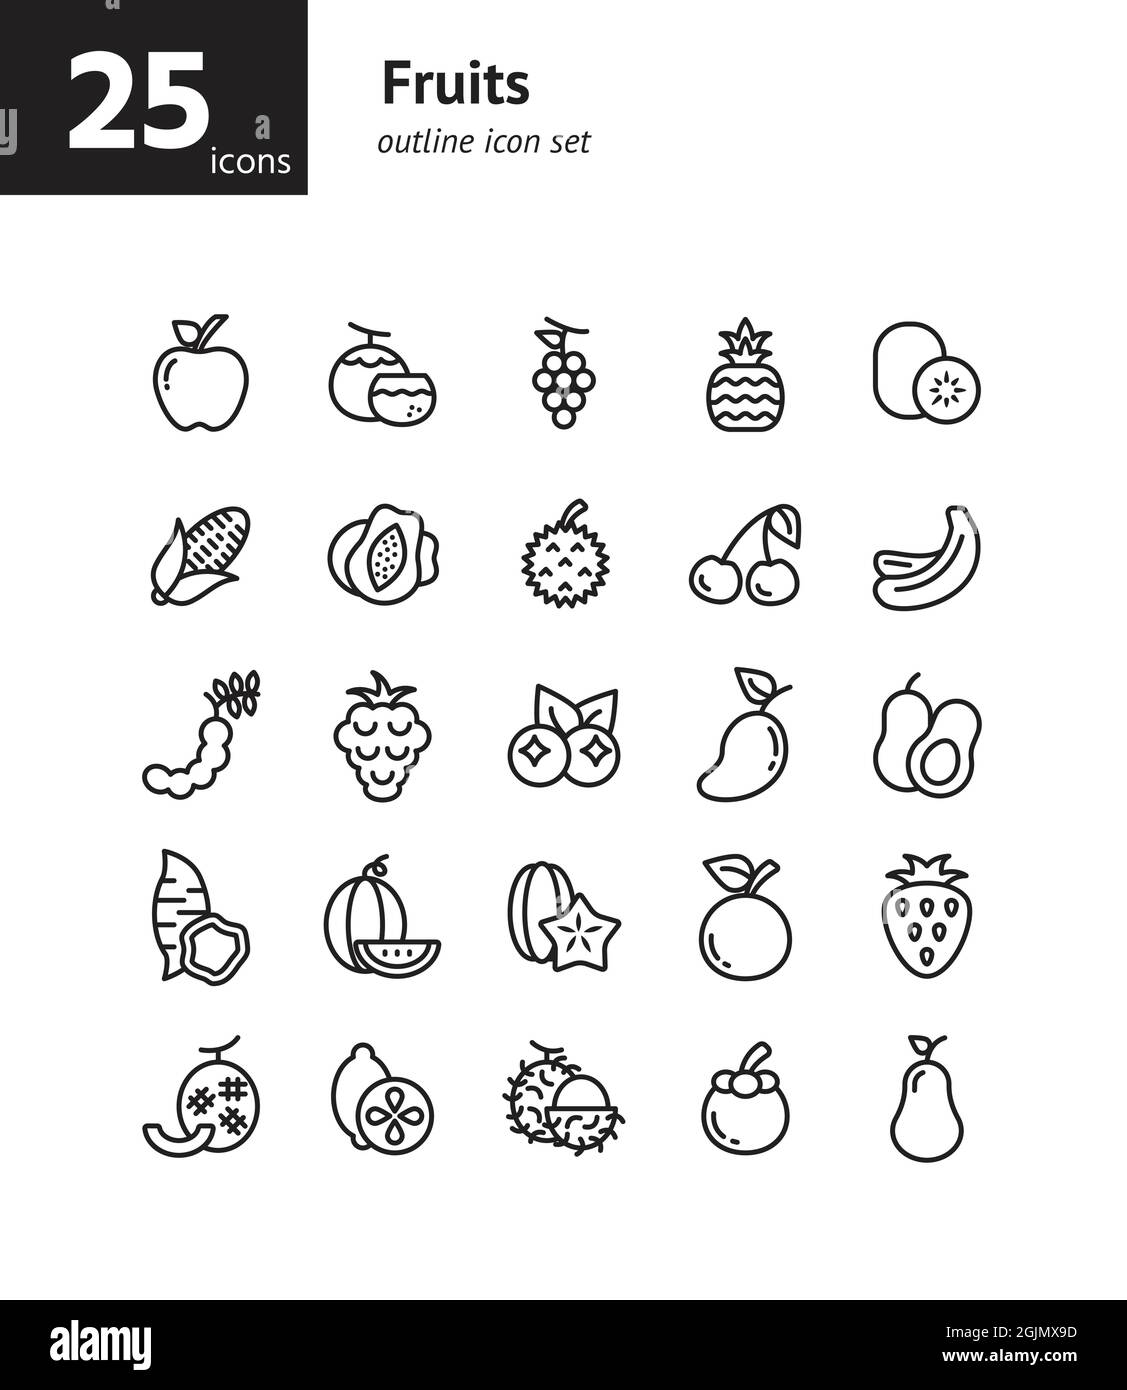 Fruits outline icon set. Vector and Illustration. Stock Vector